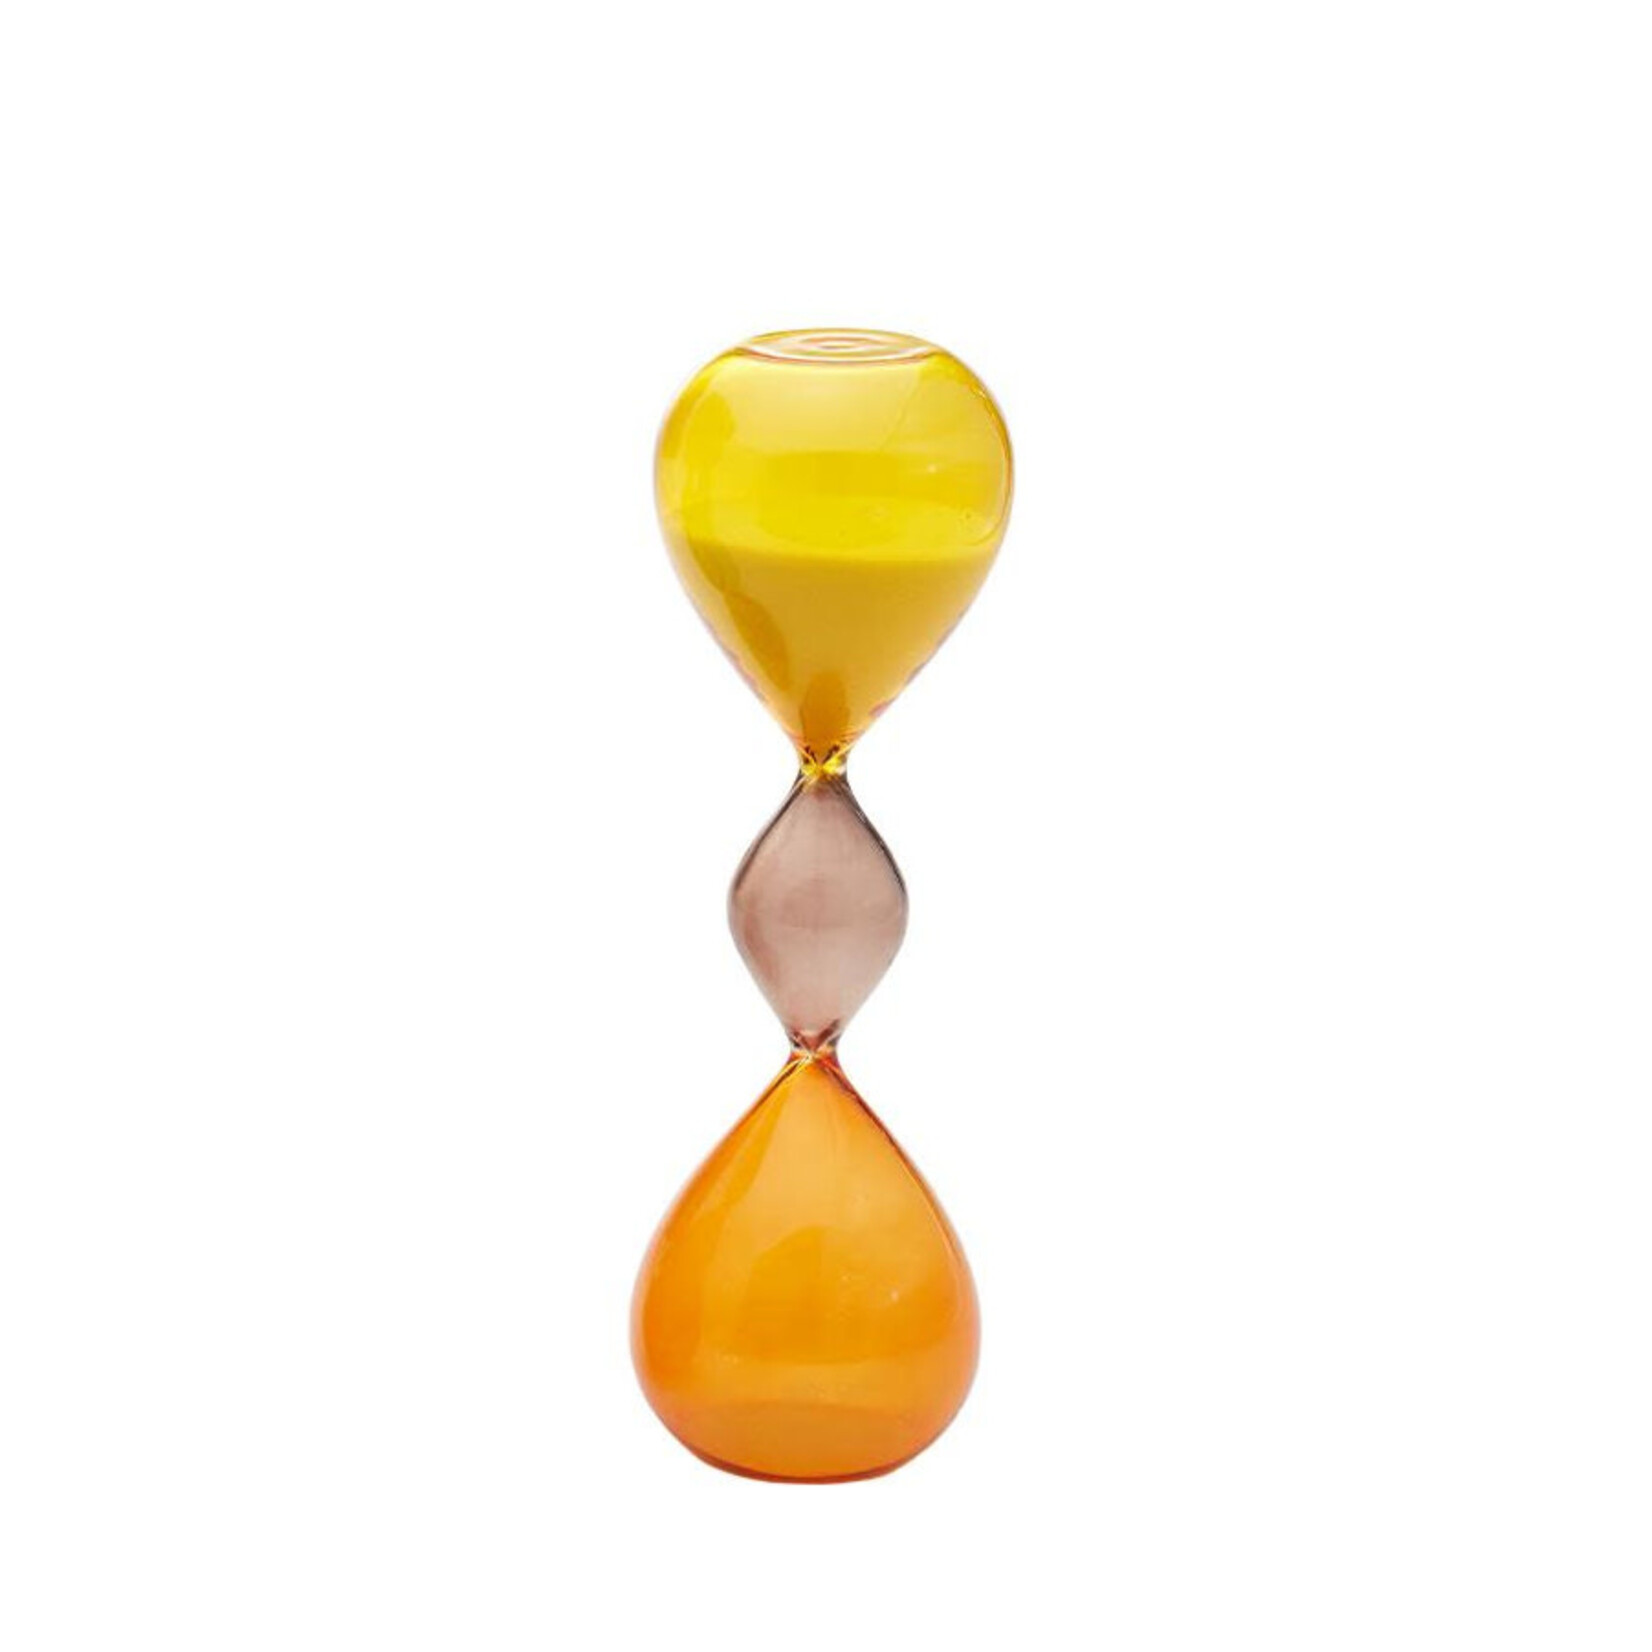 TWO COMPANY COLOR SAND TIMERS SMALL